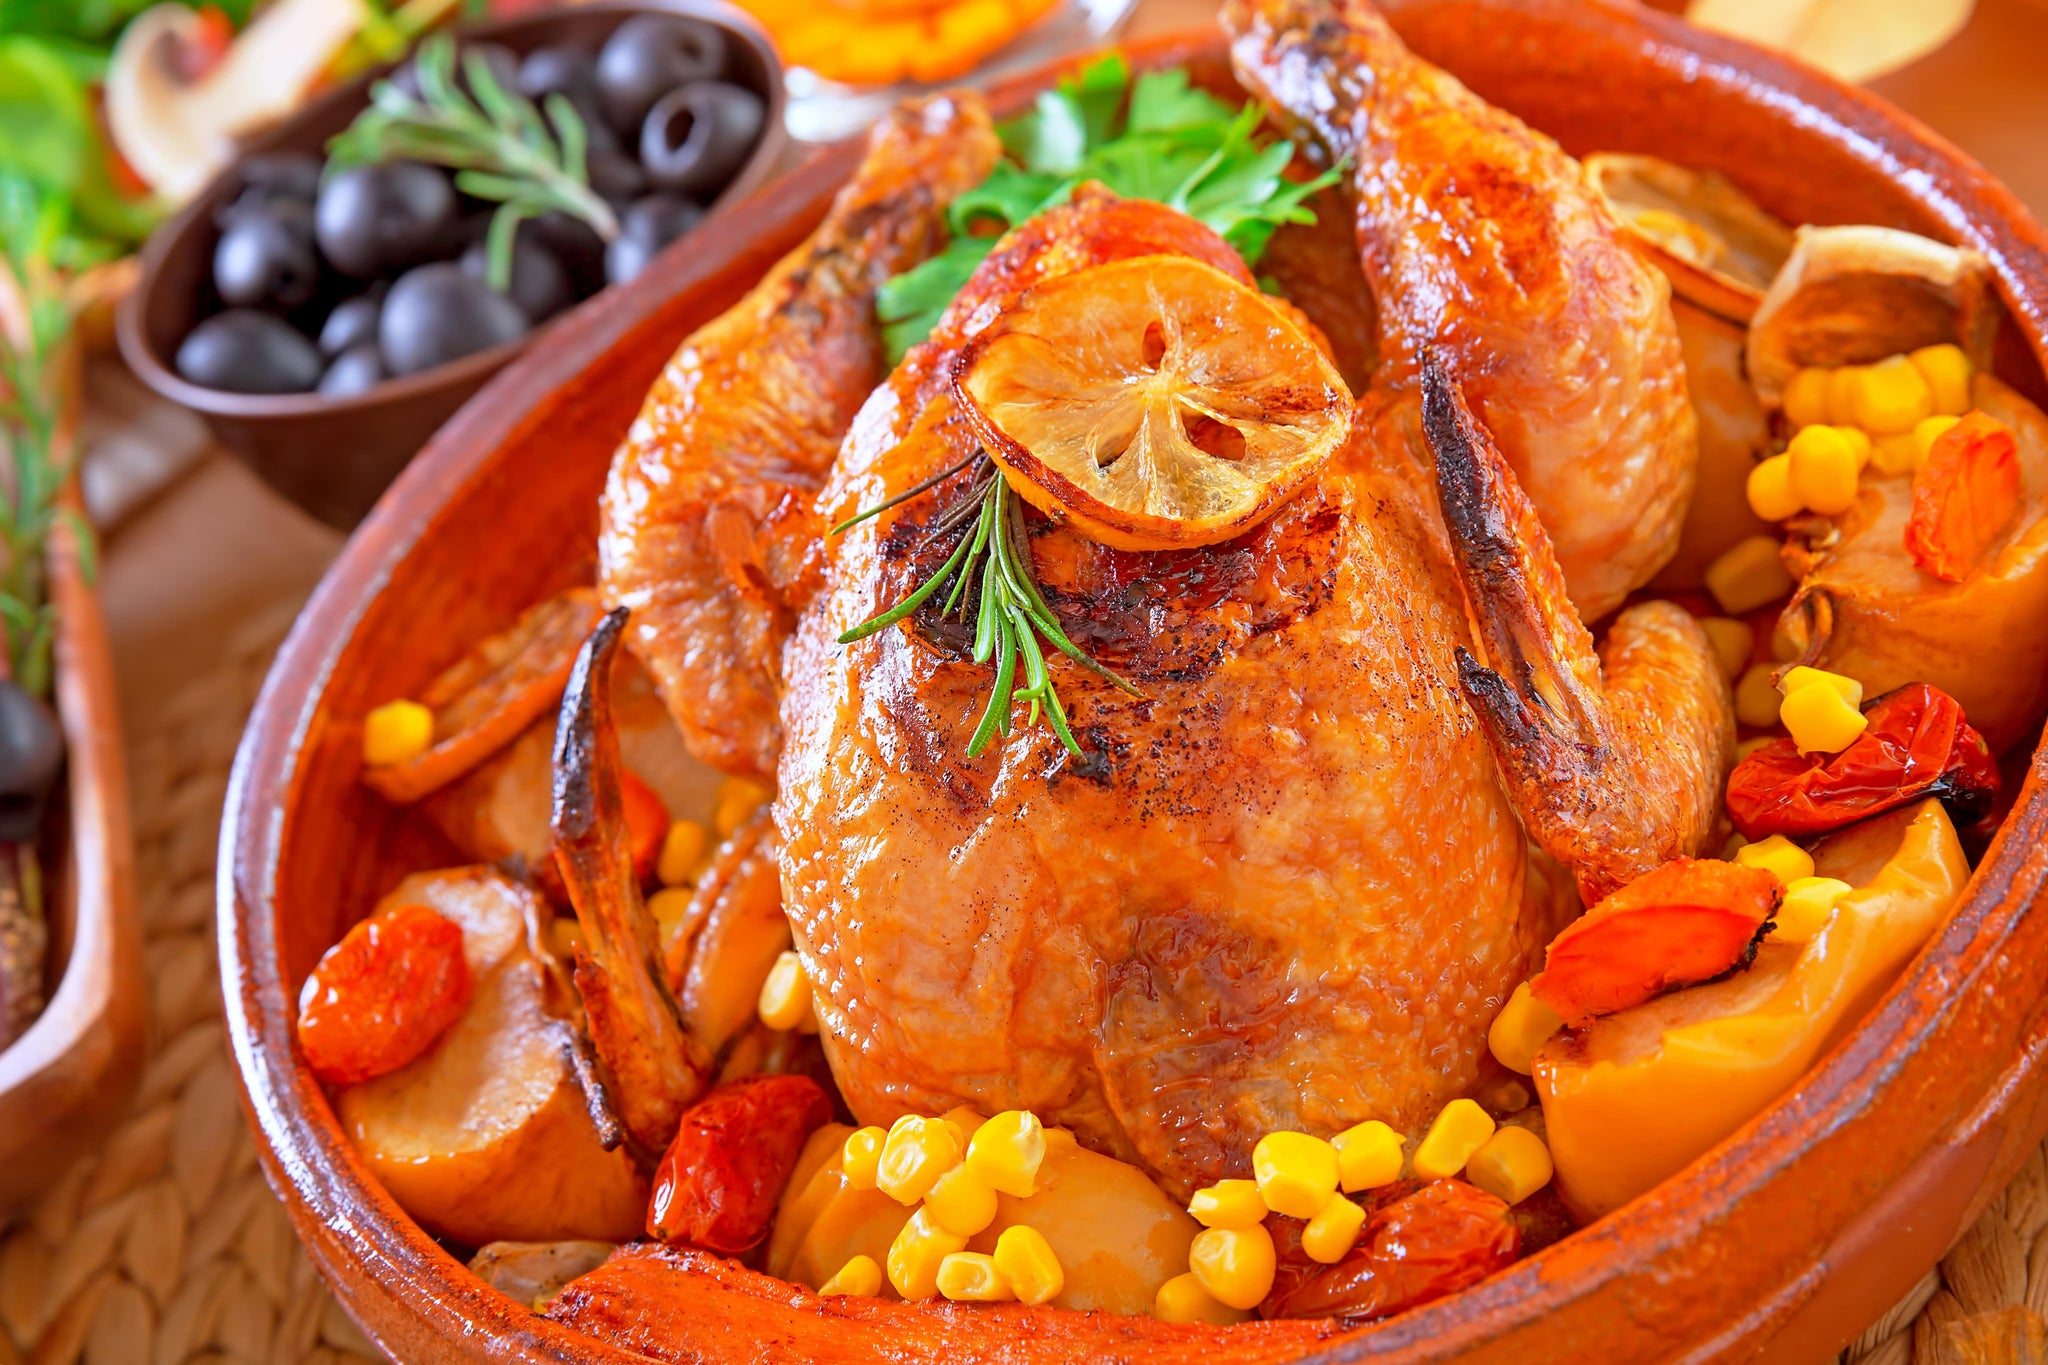 Complete vs incomplete proteins: turkey, food with essential amino acids